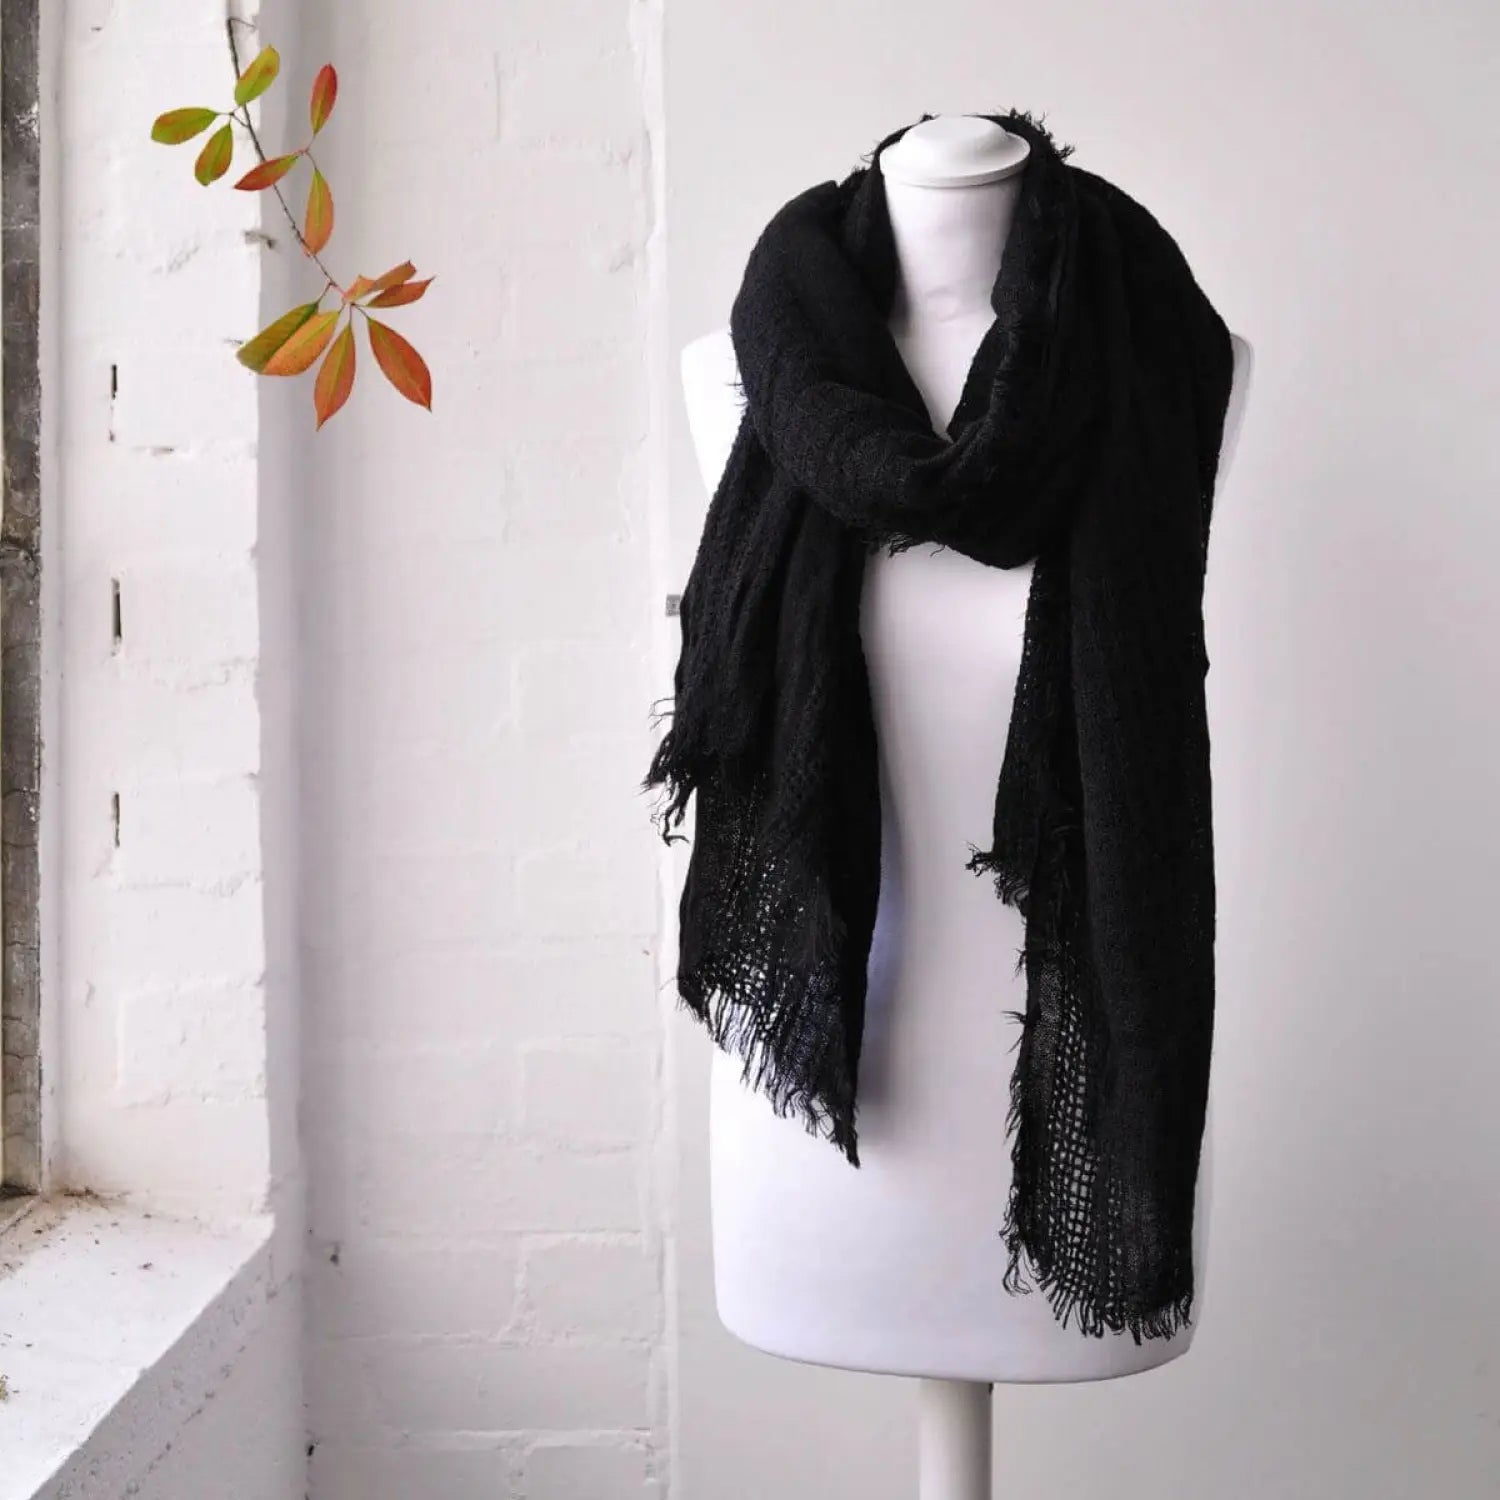 Oversized textured shawl displayed on mannequin with black scarf